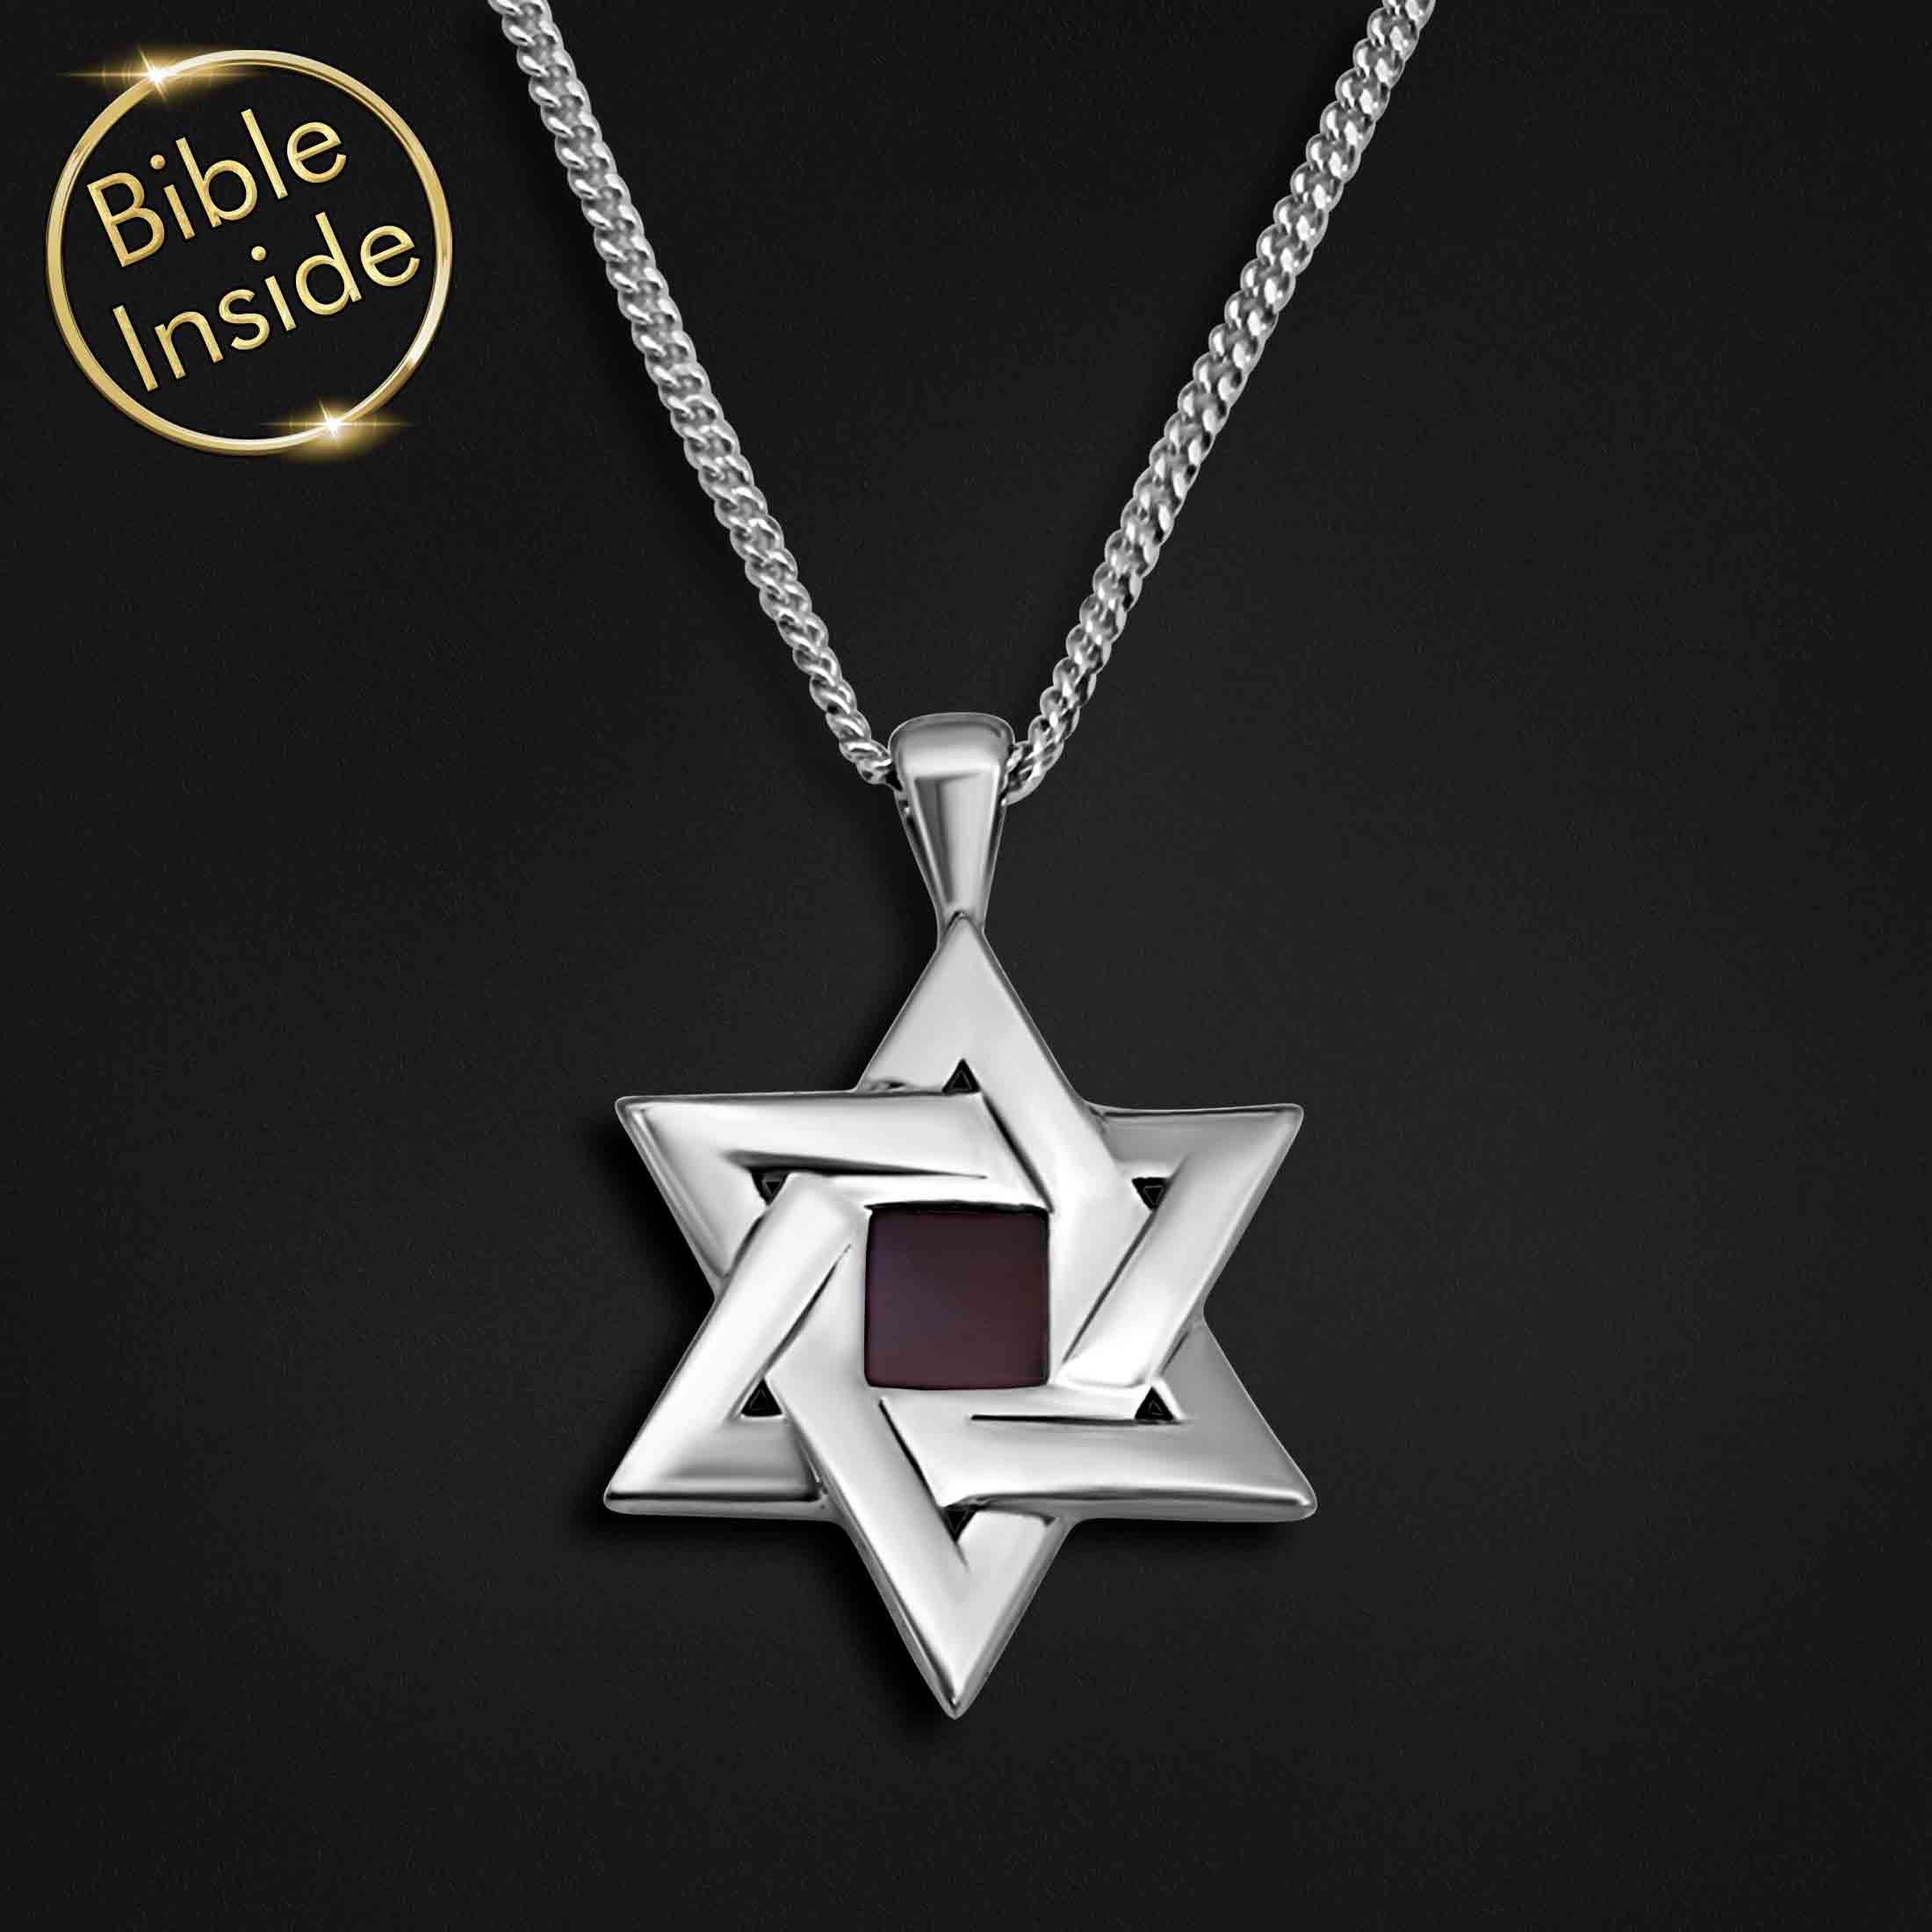 Real Silver Star Of David Necklace With The Nano Bible - Nano Jewelry